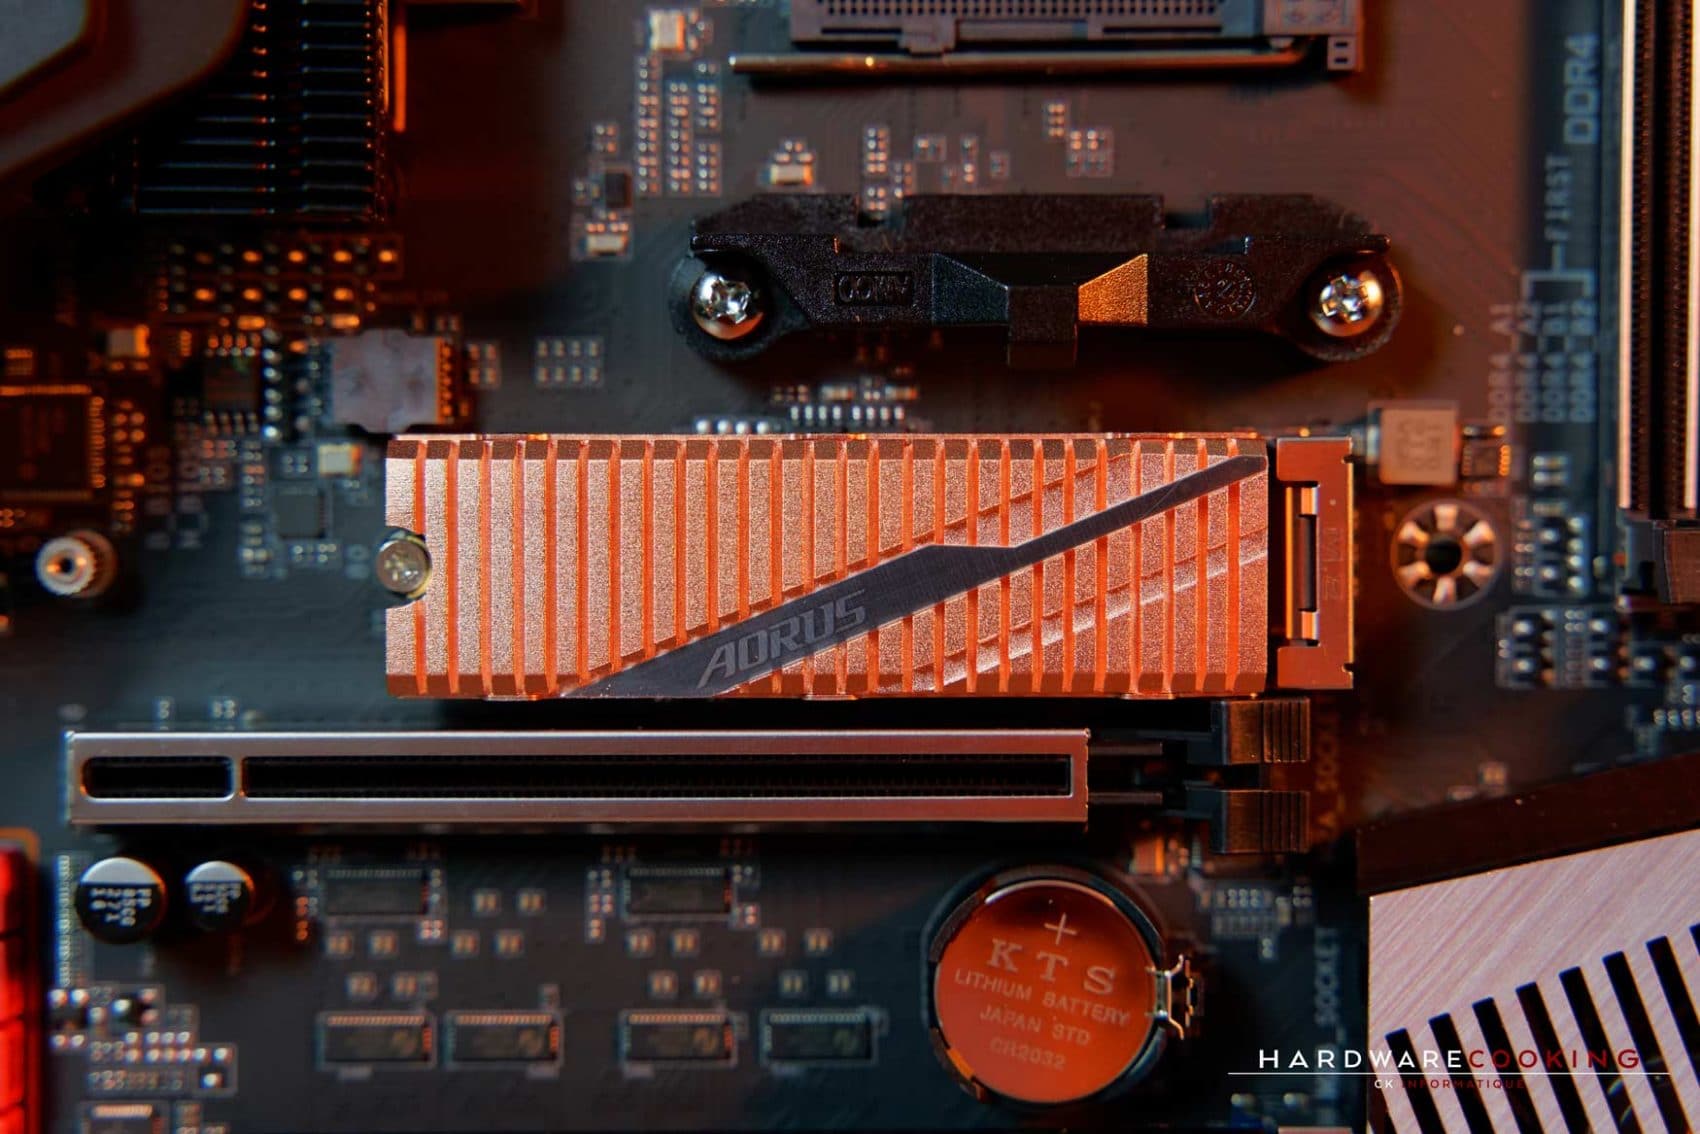 Test SSD Gigtabyte AORUS NVMe Gen4 1 To